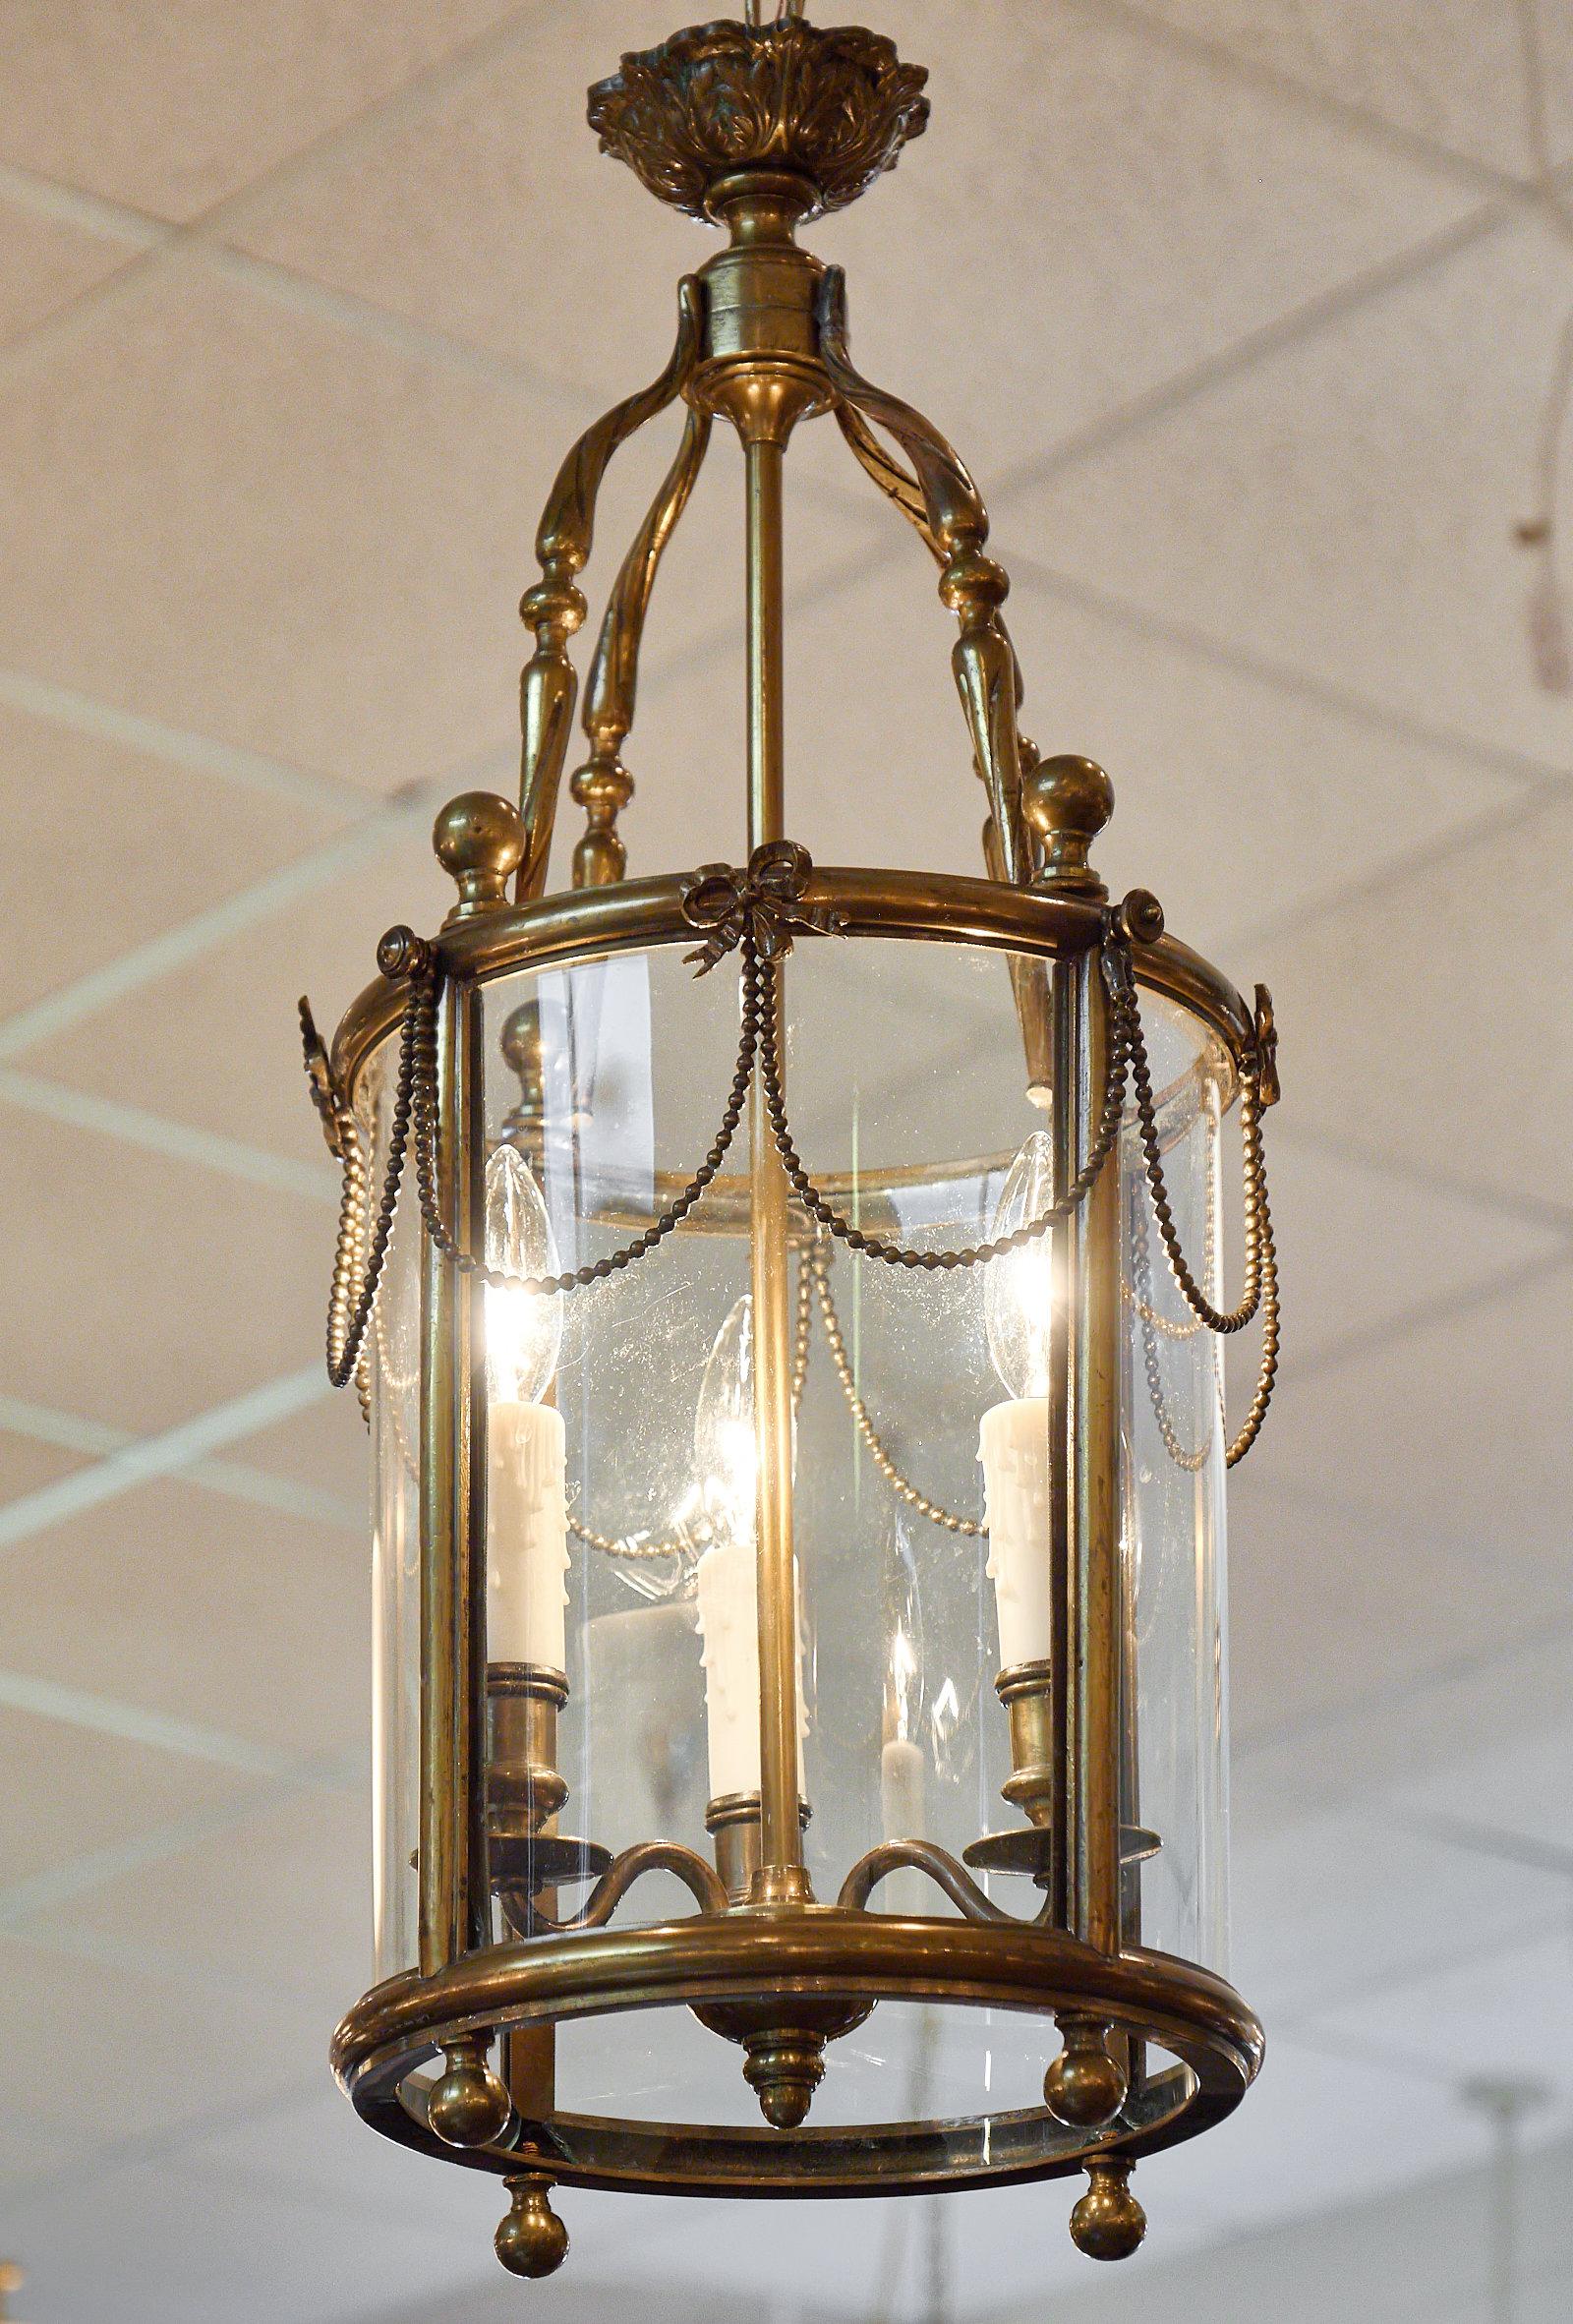 Louis XVI style bronze lantern. This fixture is made of finely cast bronze and features the original curved glass. We love the intricate detail to the structure. This lantern has been newly wired to fit US standards.